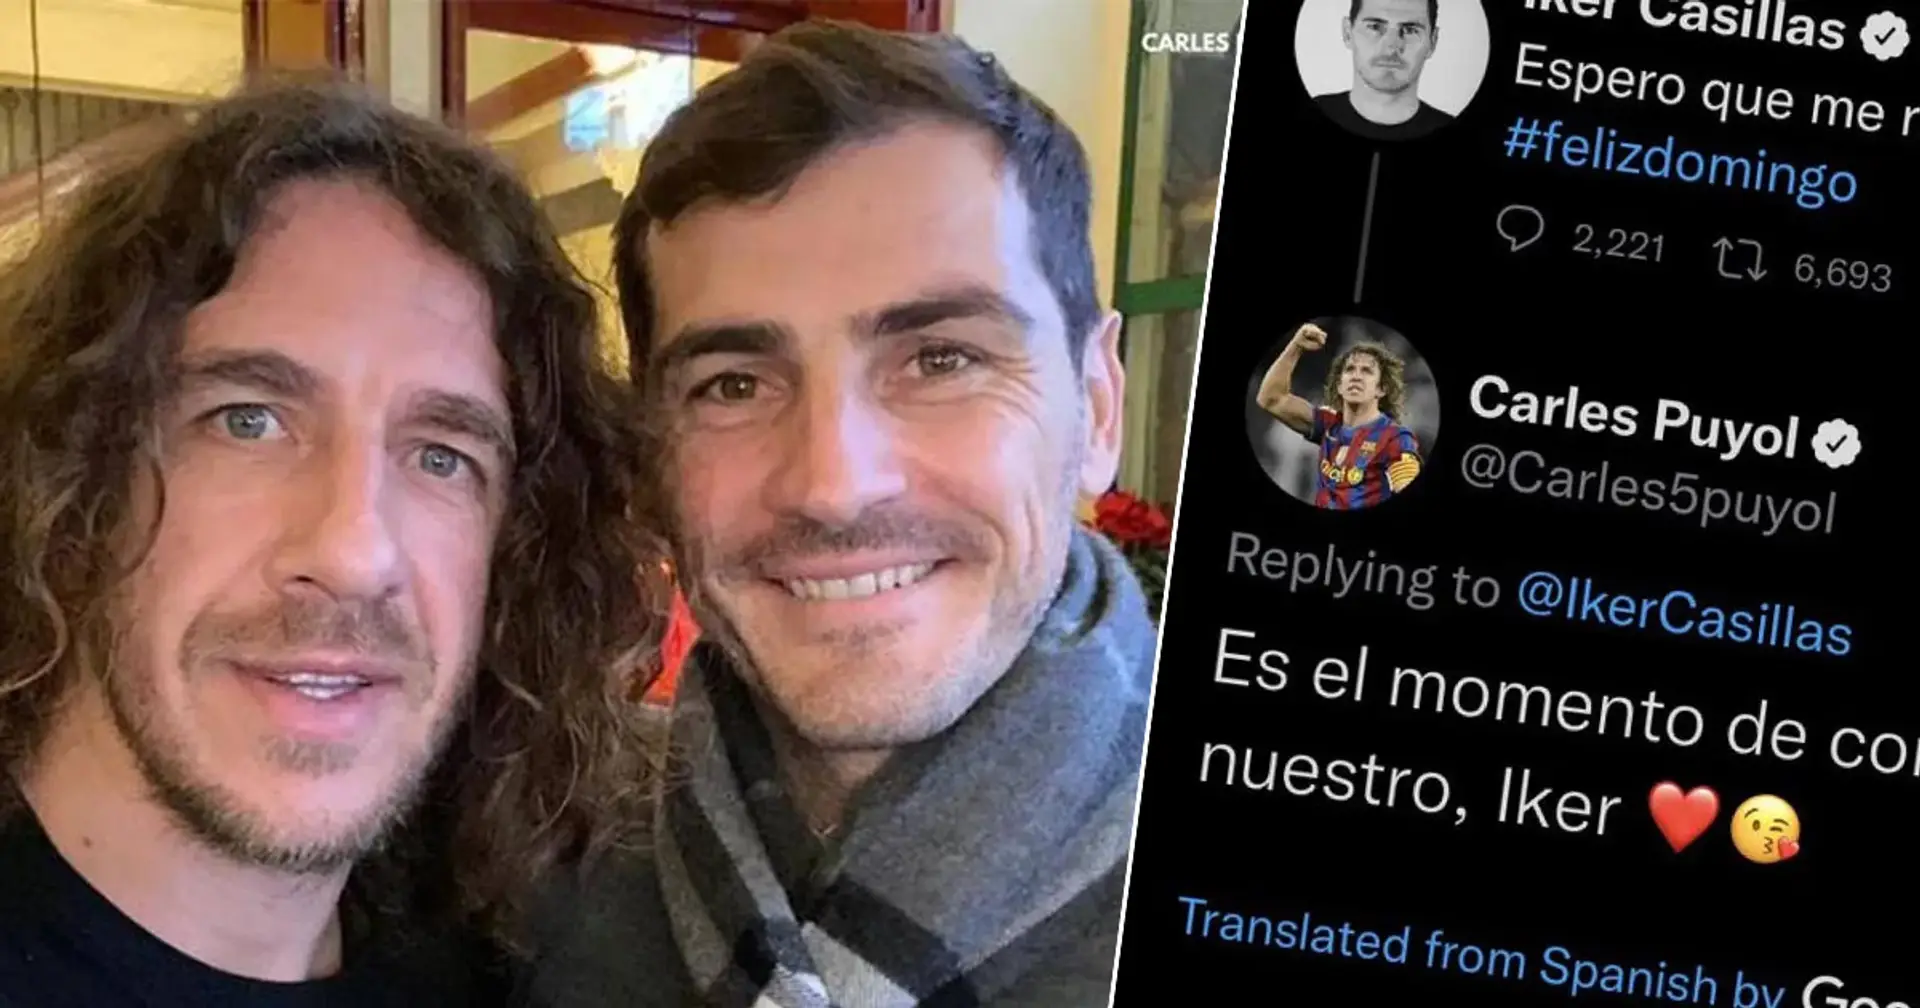 'A poor joke: Puyol apologizes for playing along with Casillas hacked coming-out tweet